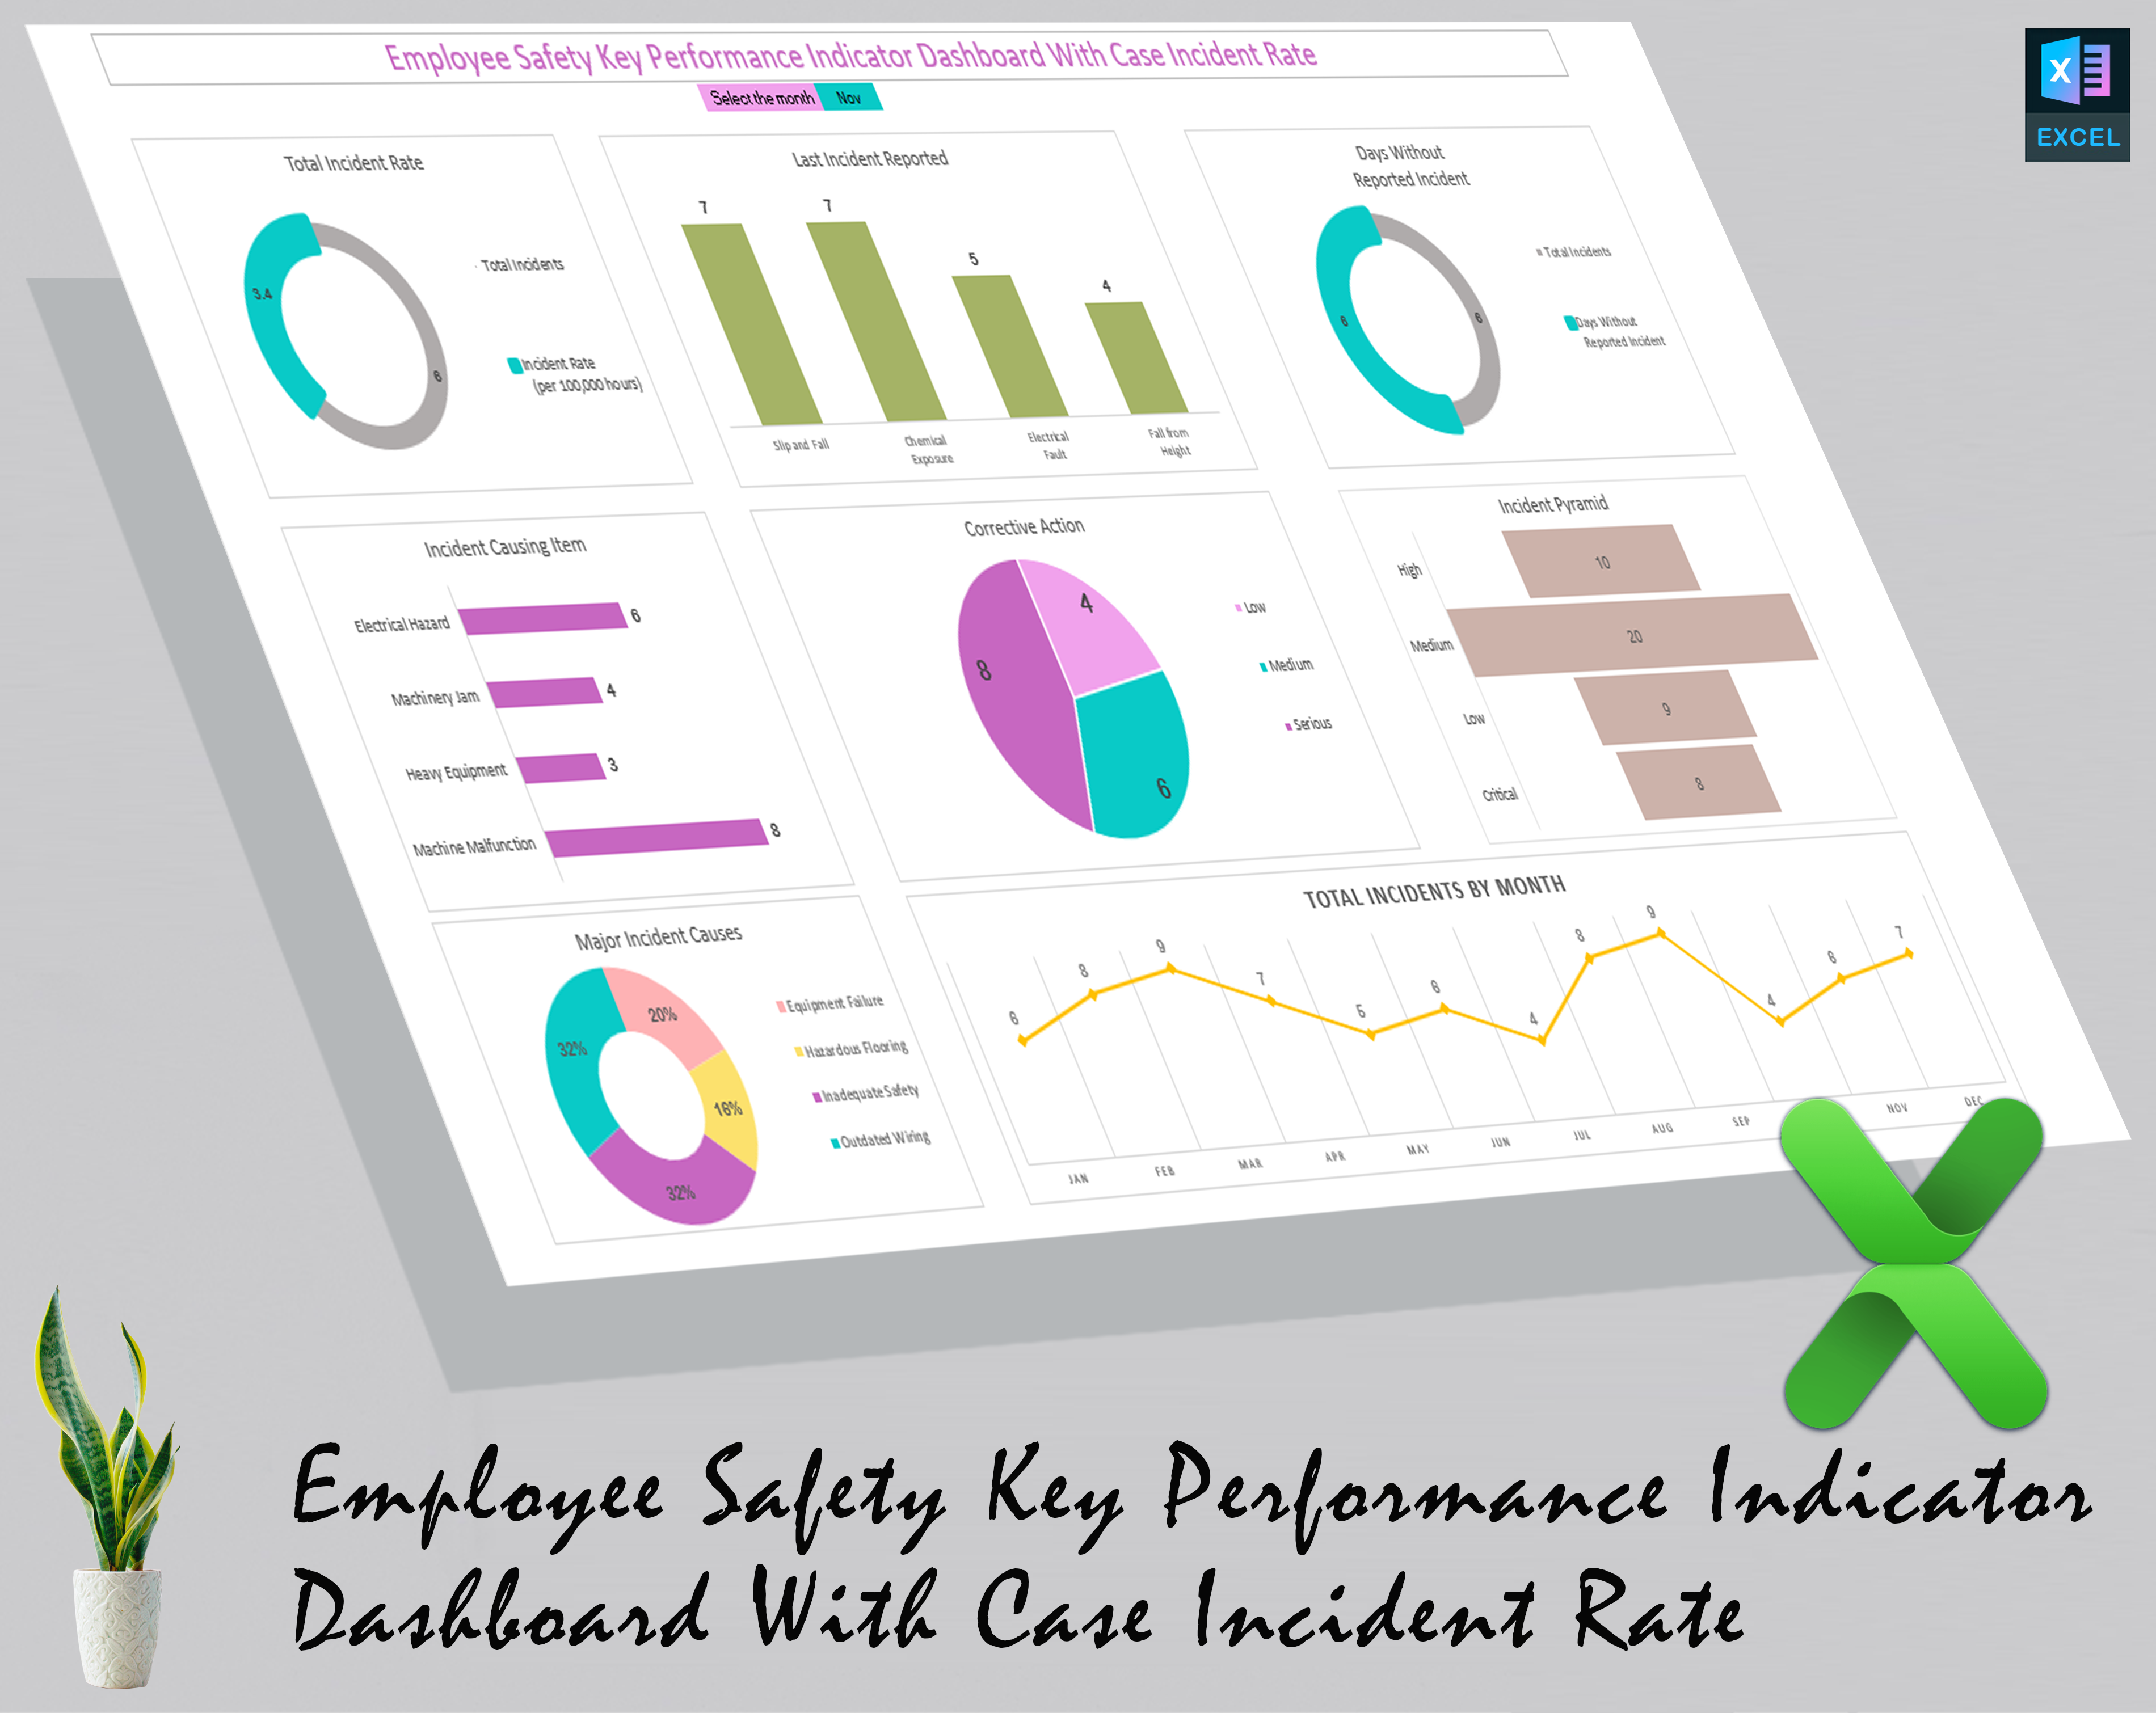 employee safety key performance indicator dashboard with case incident rate